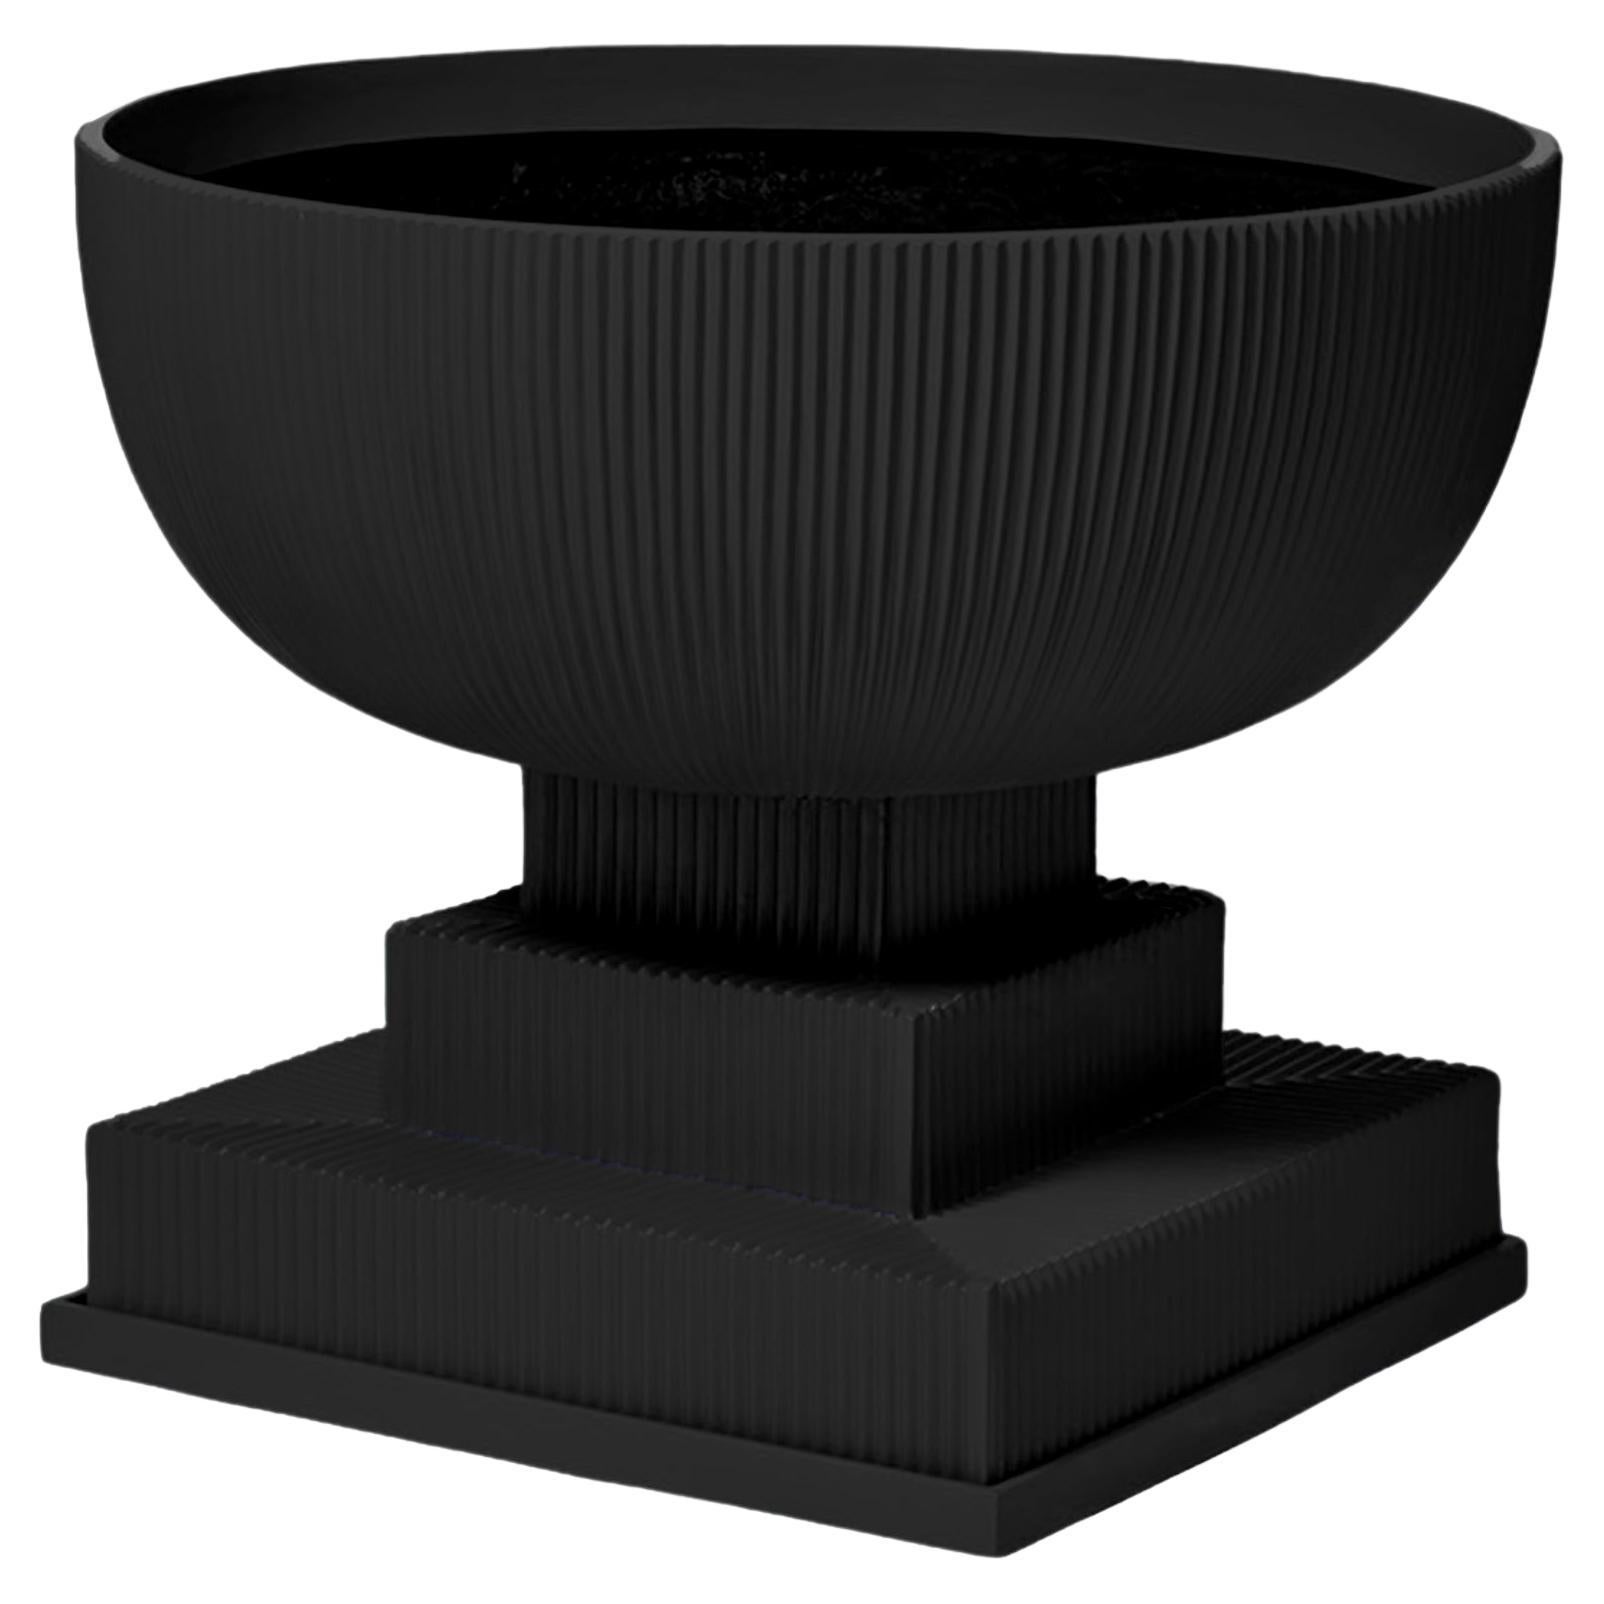 Oversize Modern Urn Planter 'Black' by TFM, Represented by Tuleste Factory